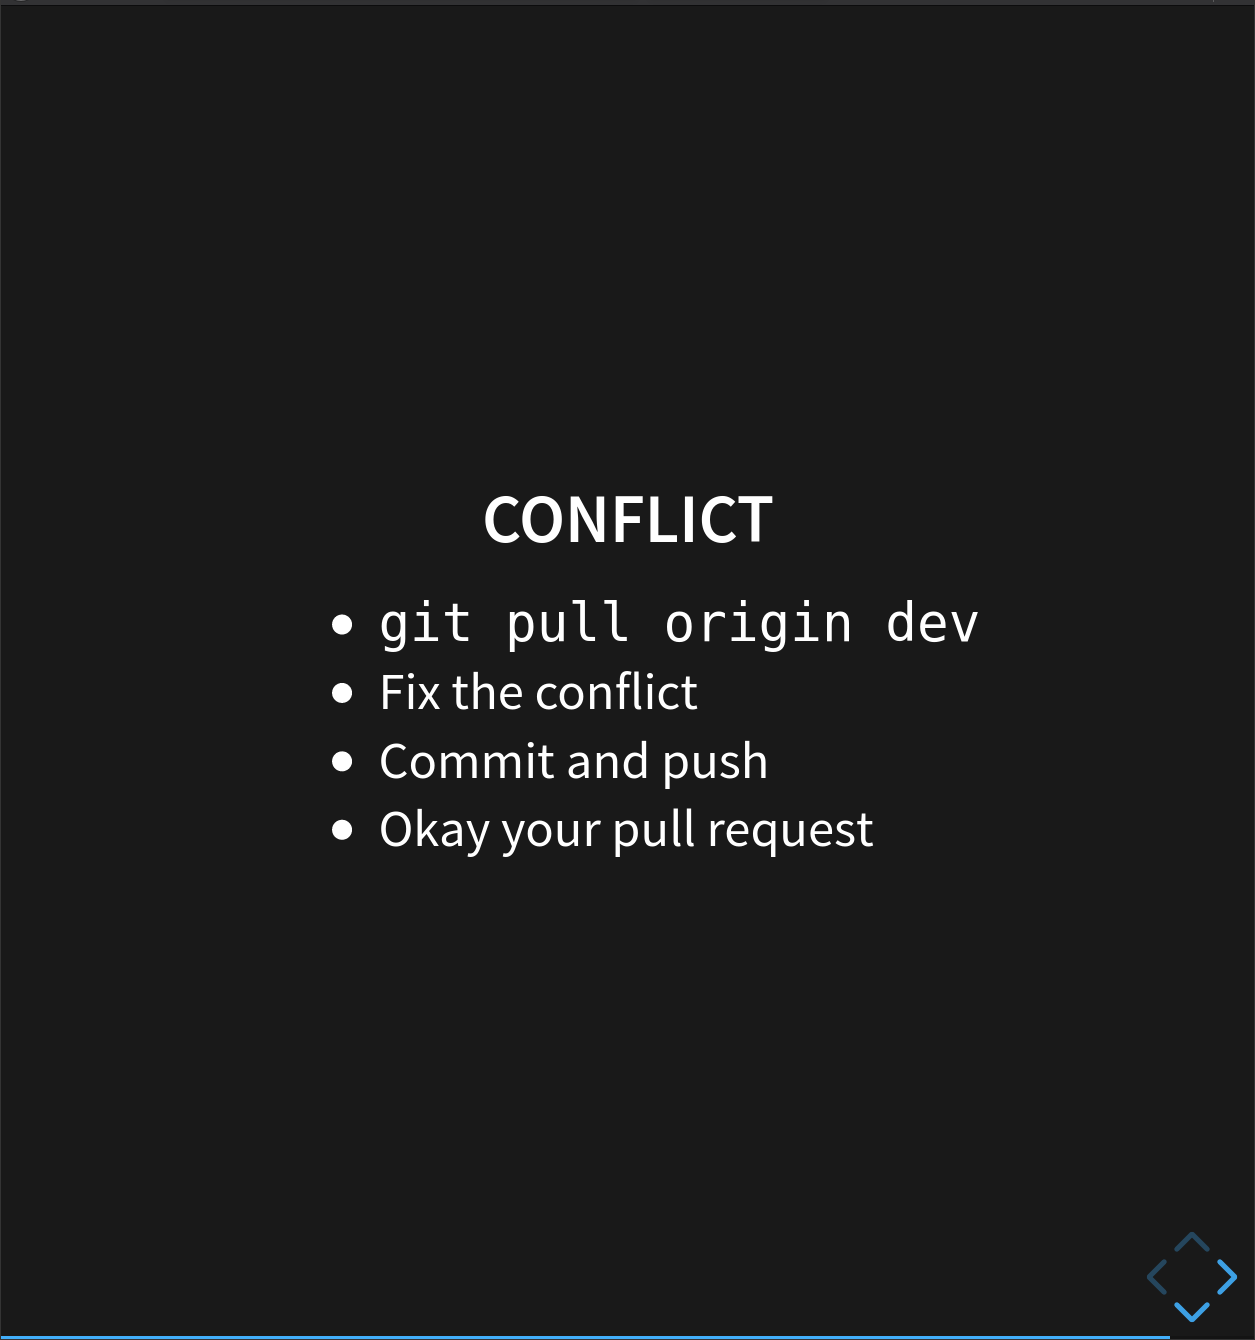 Resolving conflicts